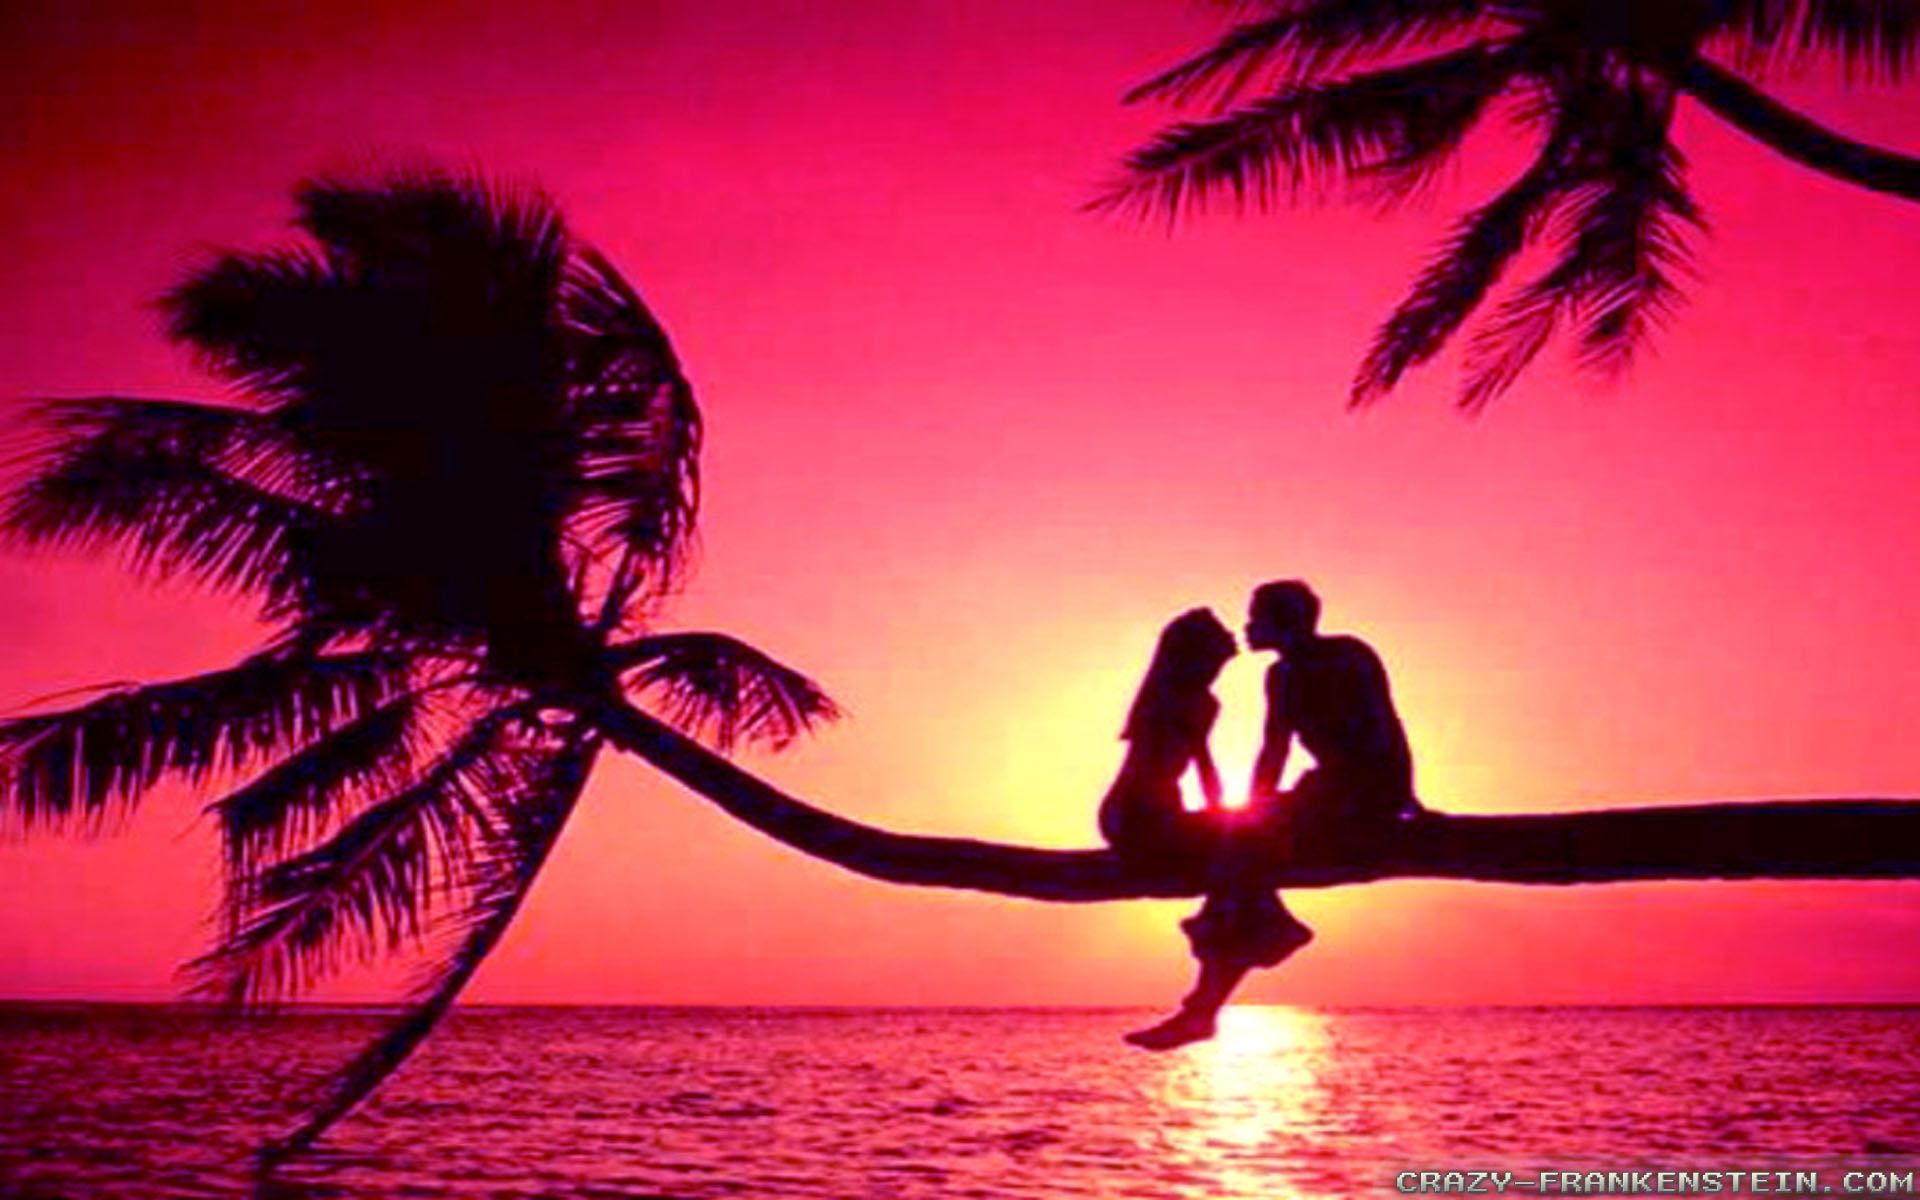 Best hd love wallpapers for mobile phones